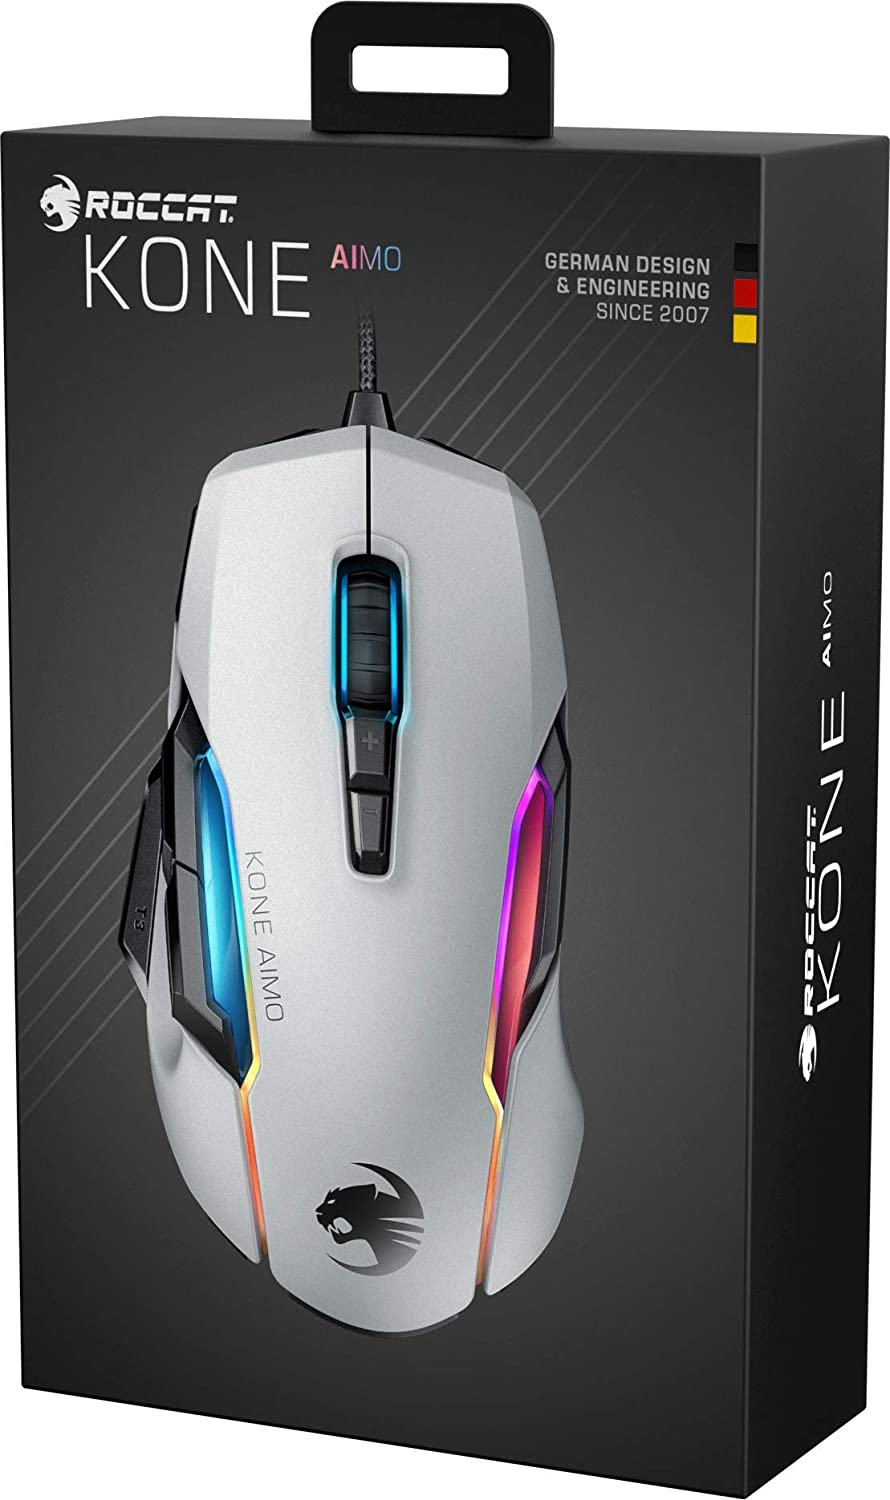 https://thaher.tech/wp-content/uploads/nc/catalog/Product-Images/Kone-AIMO-Remastered-4.jpg